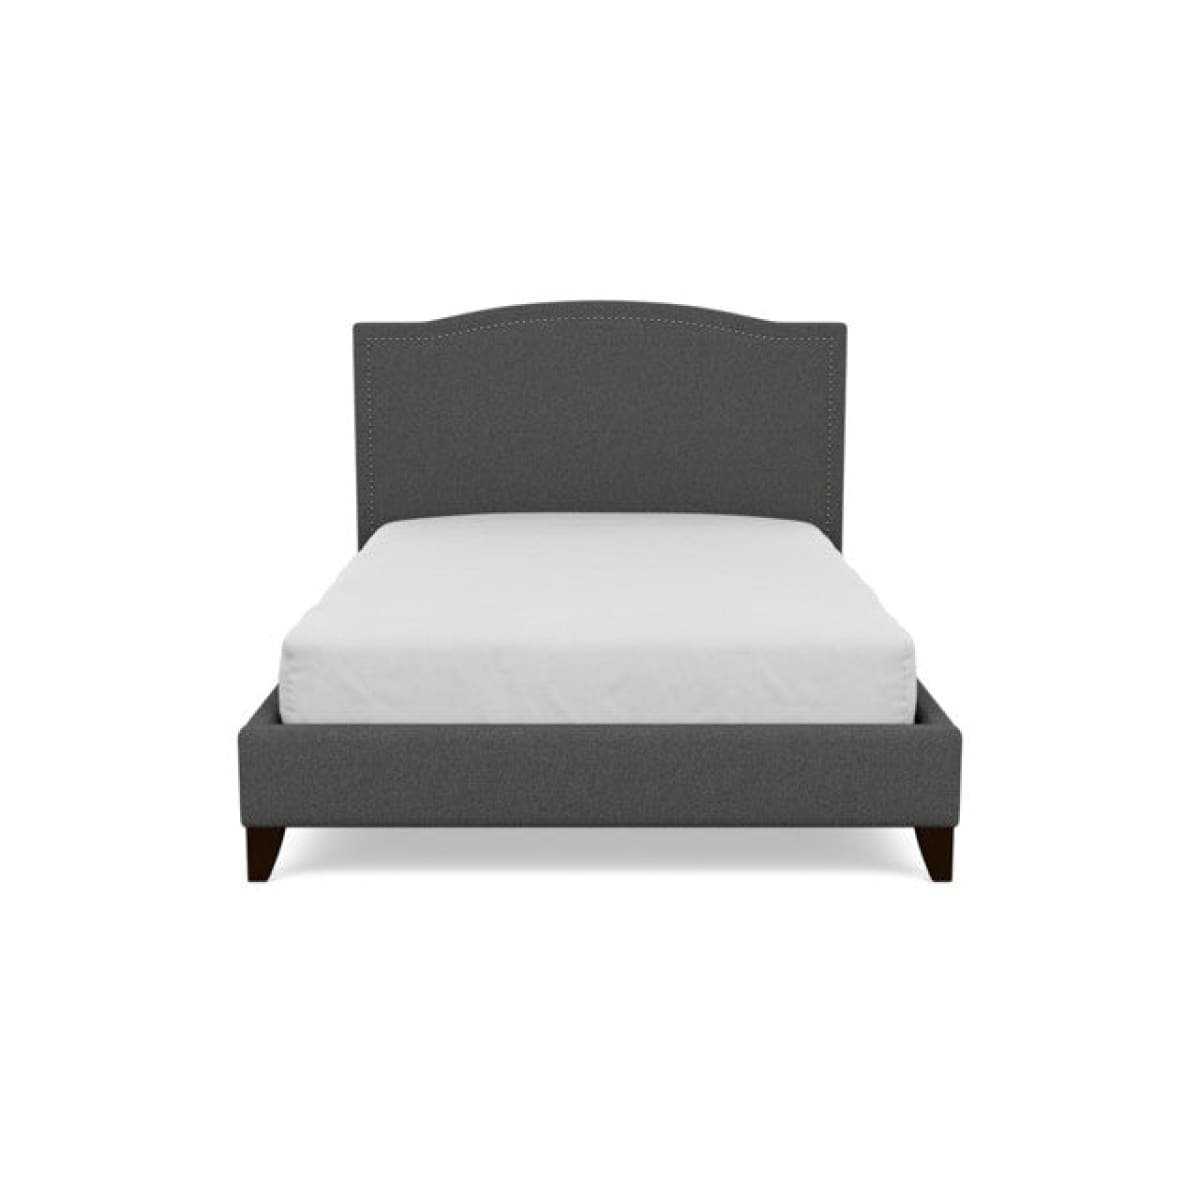 Else Custom Made To Order Canadian Made Fabric Upholstery Bed - $1599.99 - BED